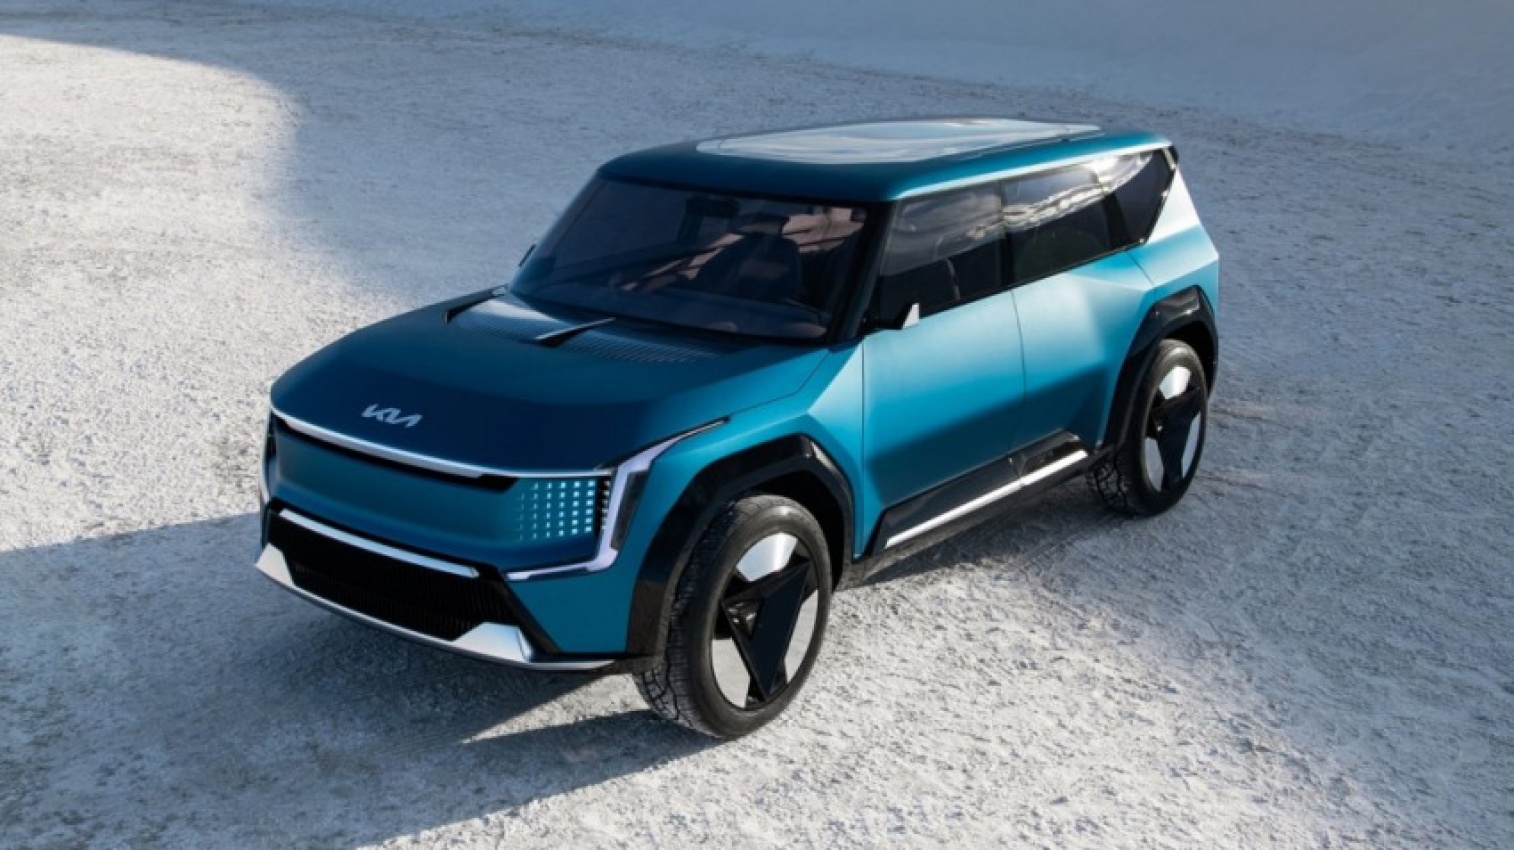 autos, cars, kia, truck, the electric kia pickup truck is aiming for premium quality